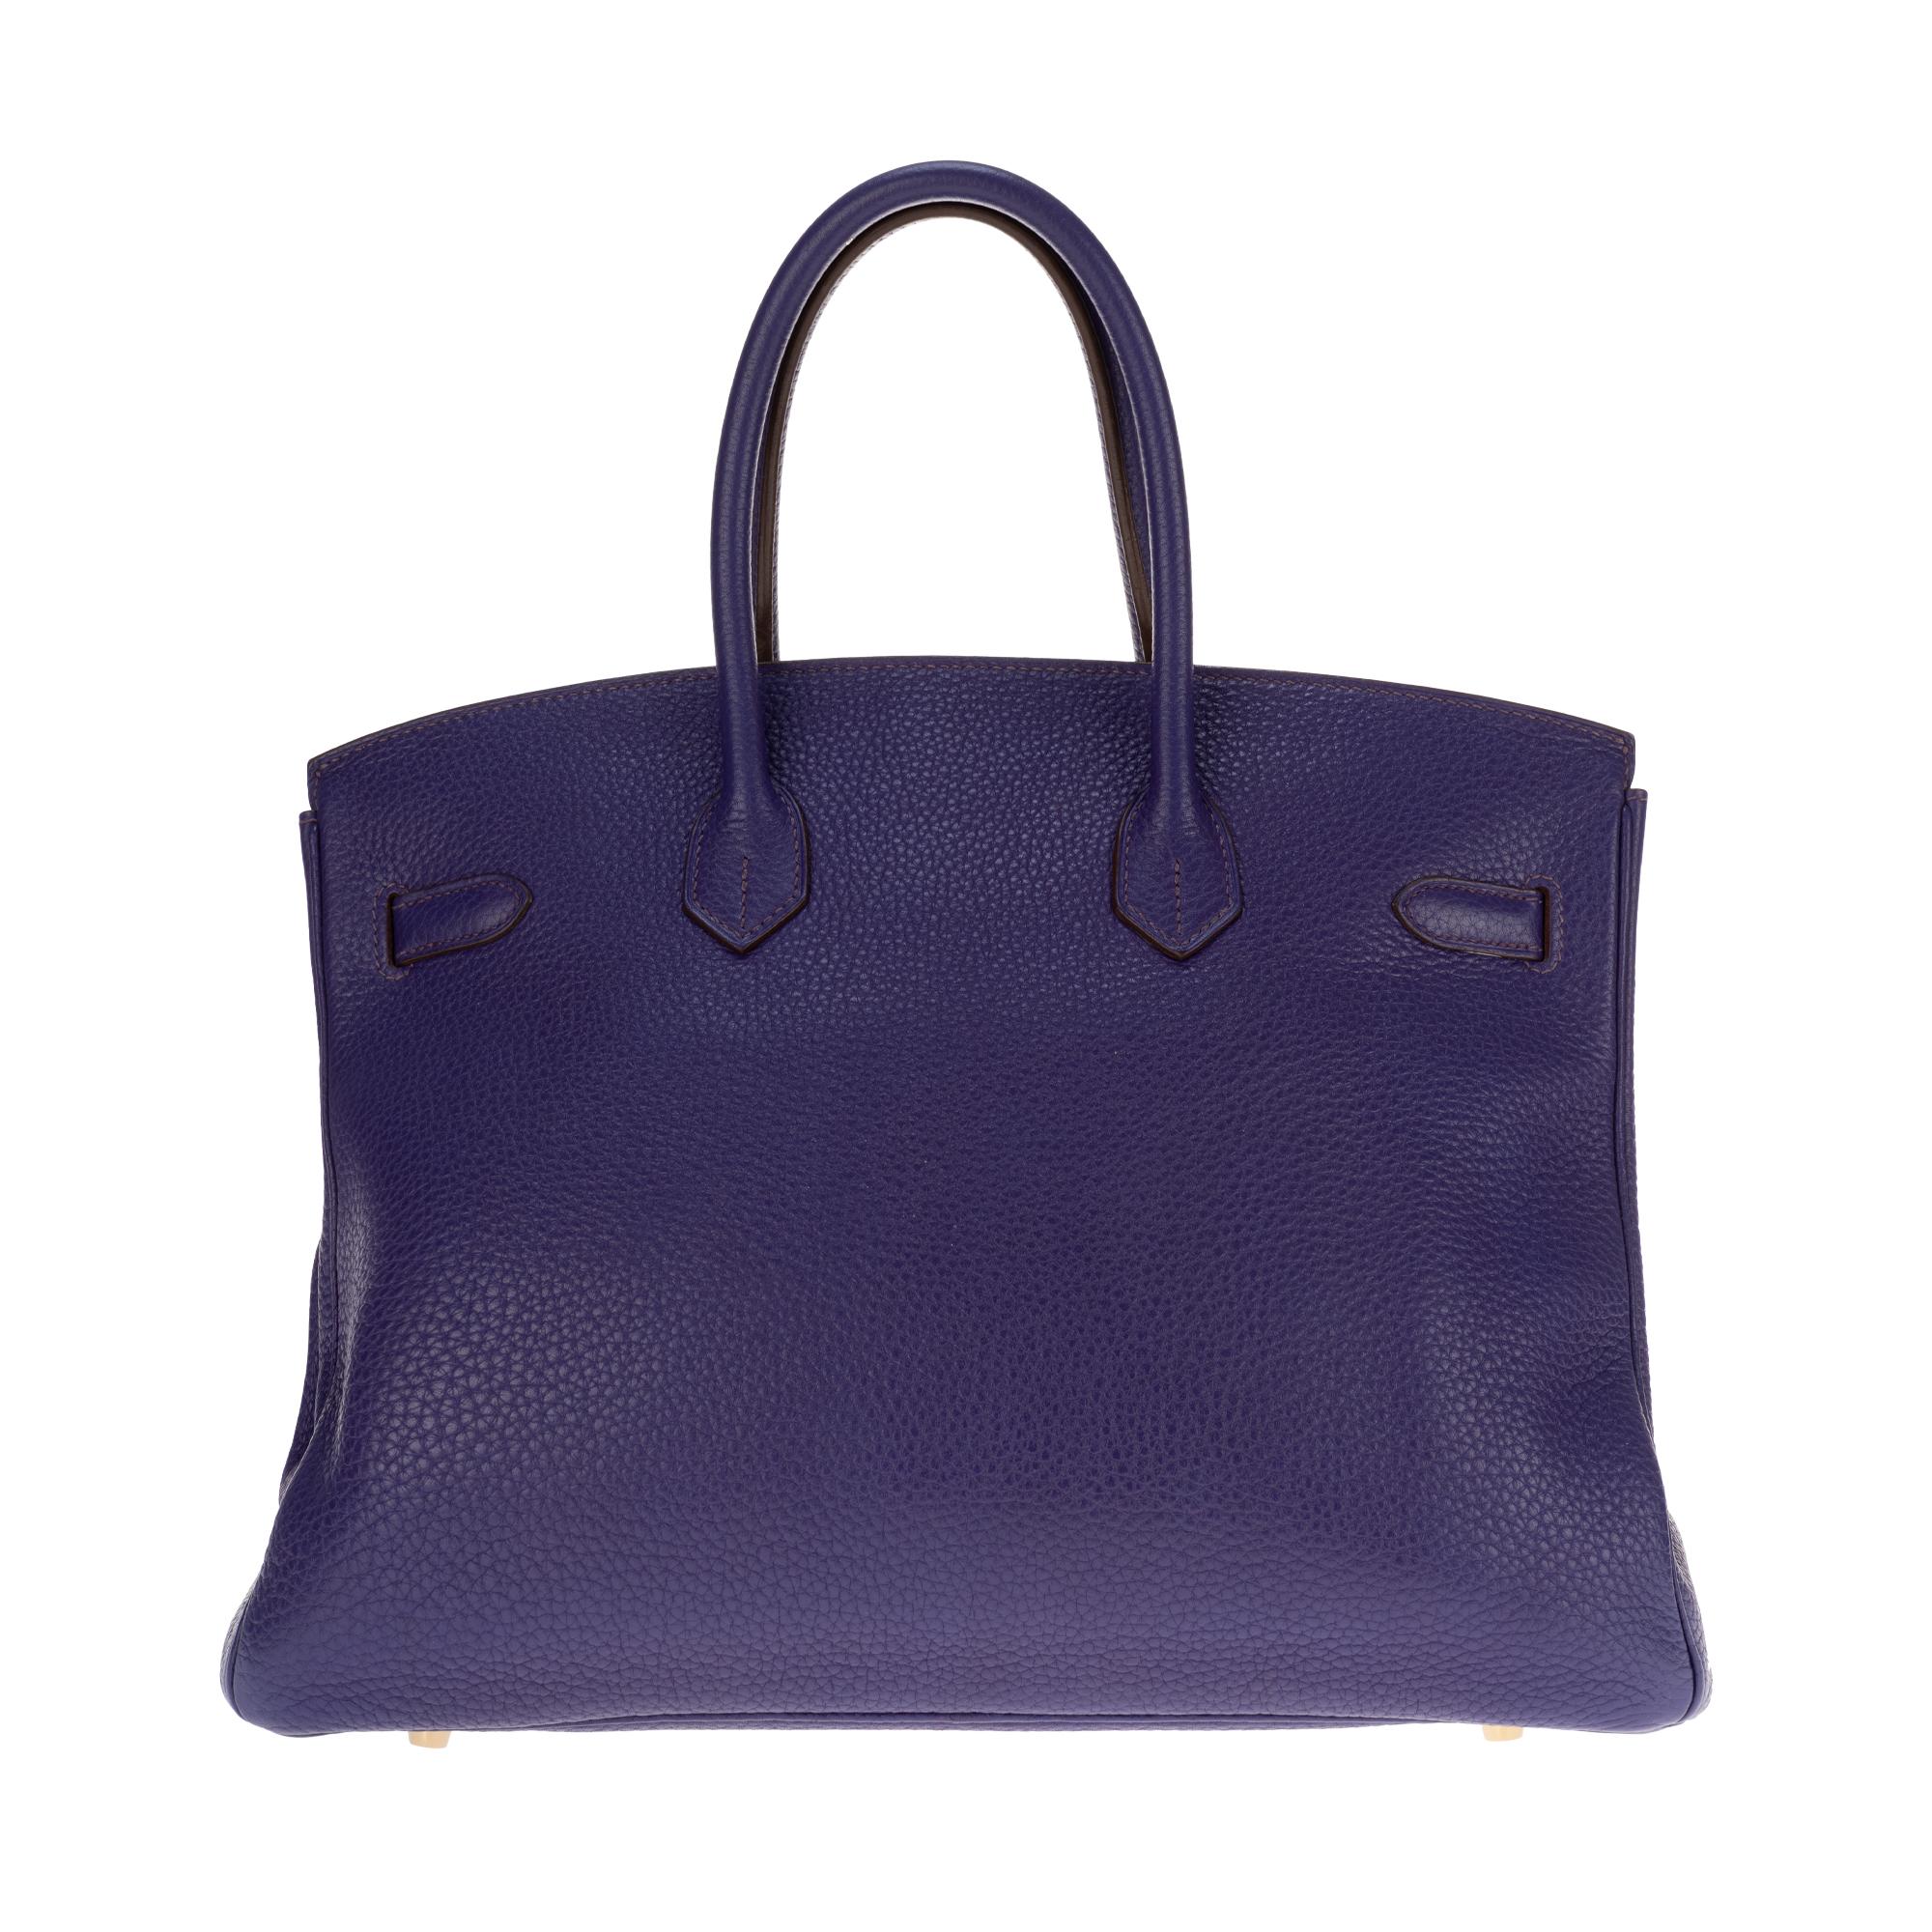 Stunning and rare Hermes Birkin handbag 35 cm in Togo purple leather, gold-plated hardware, double handle in purple leather for a hand-held. Flap closure. Purple leather inner lining, zipped pocket, patch pocket.

Signature: 